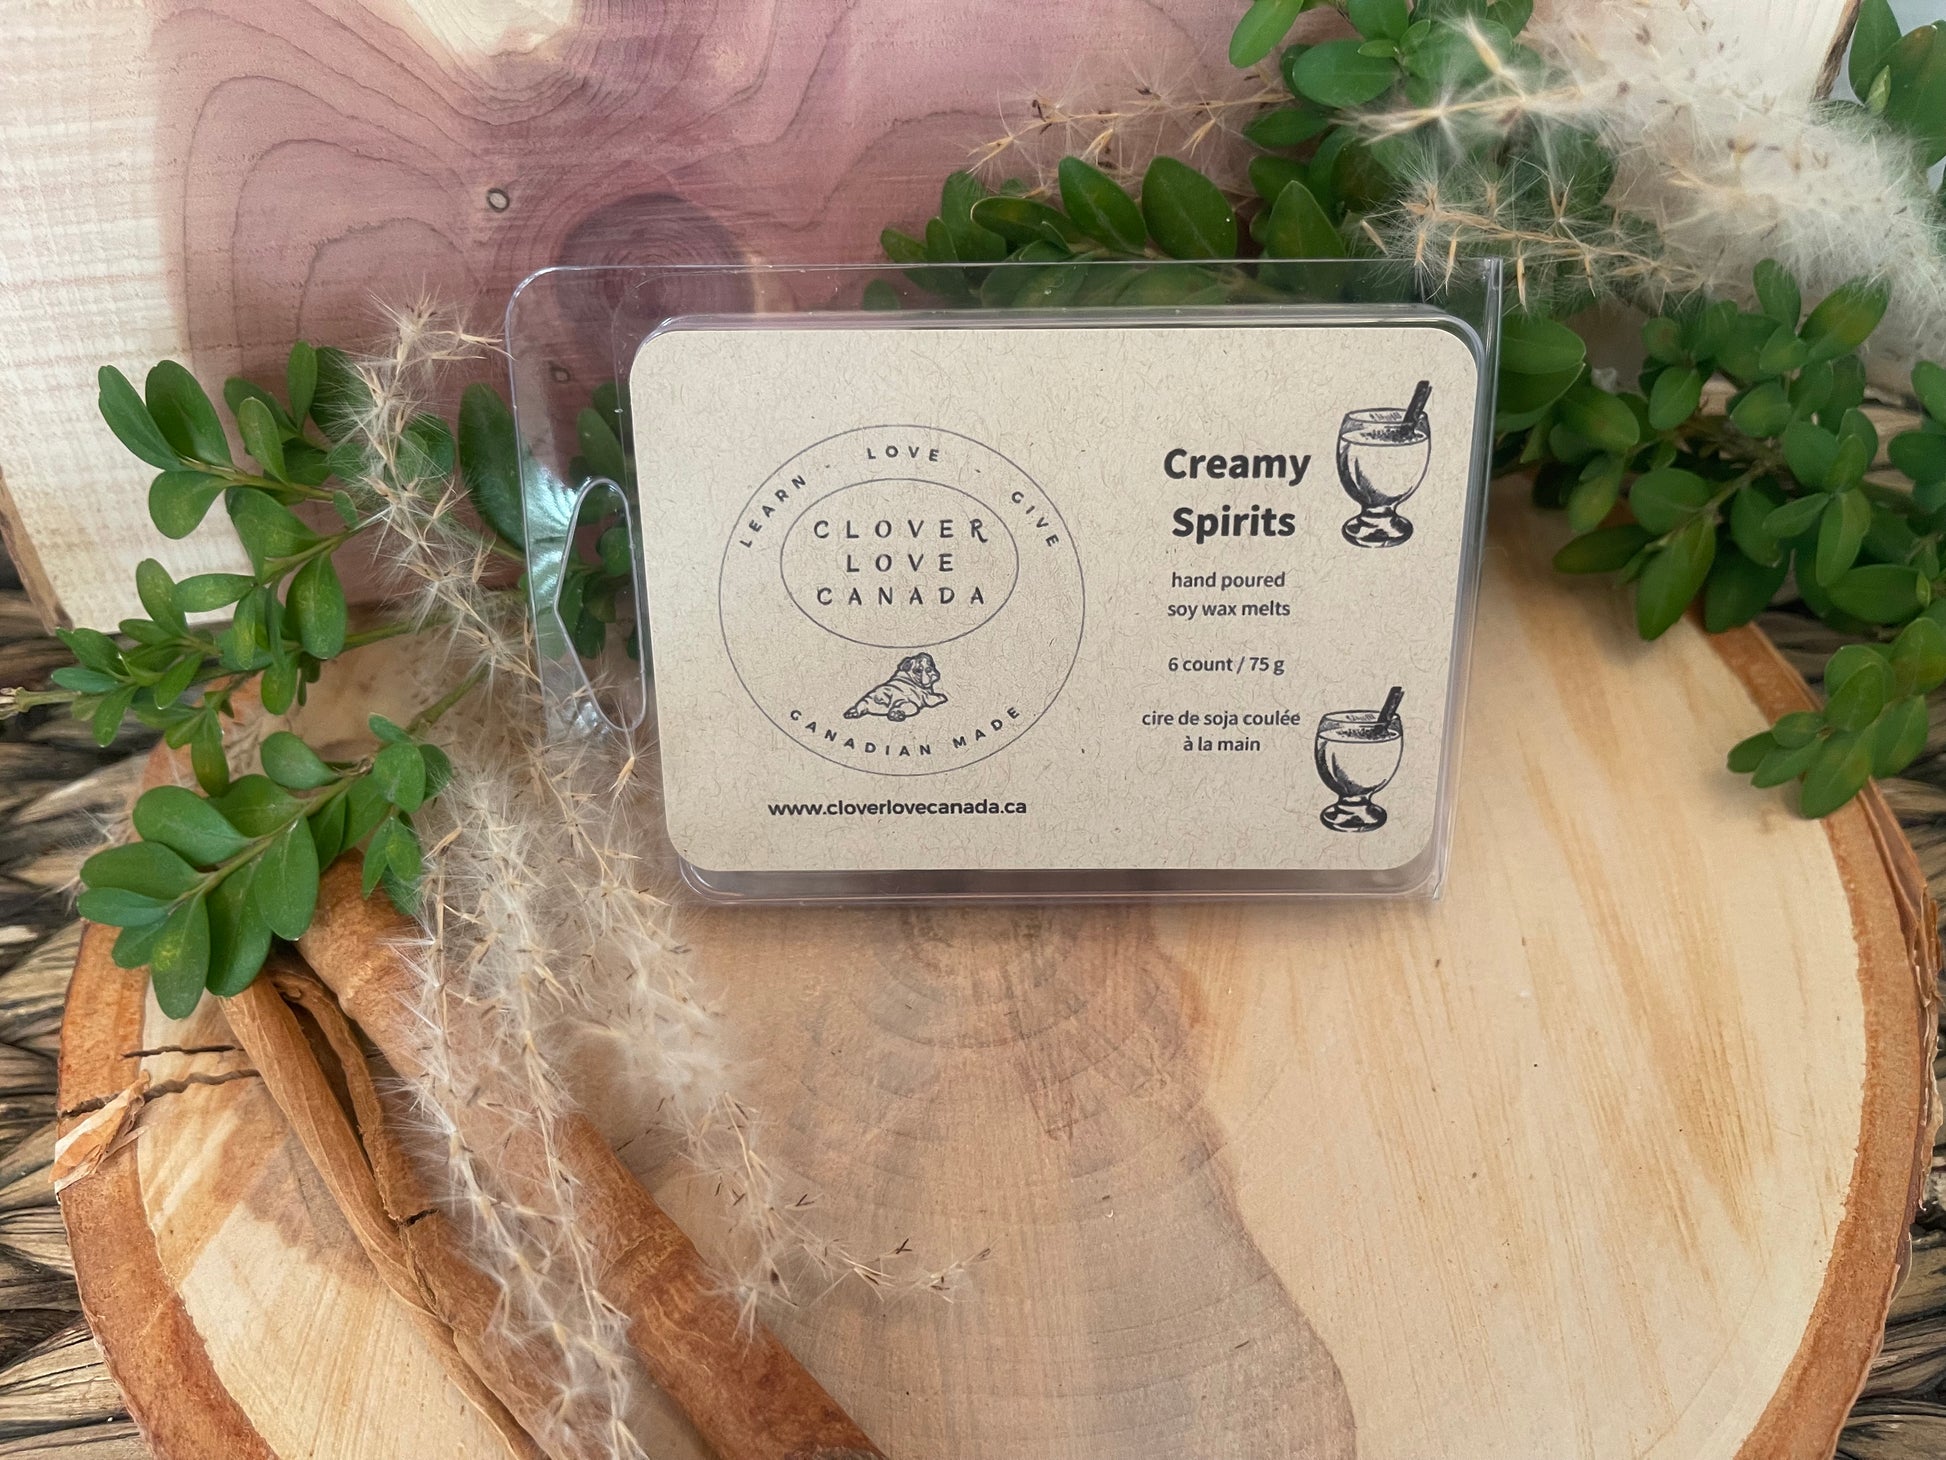 Creamy Spirits soy scented wax melts hand poured